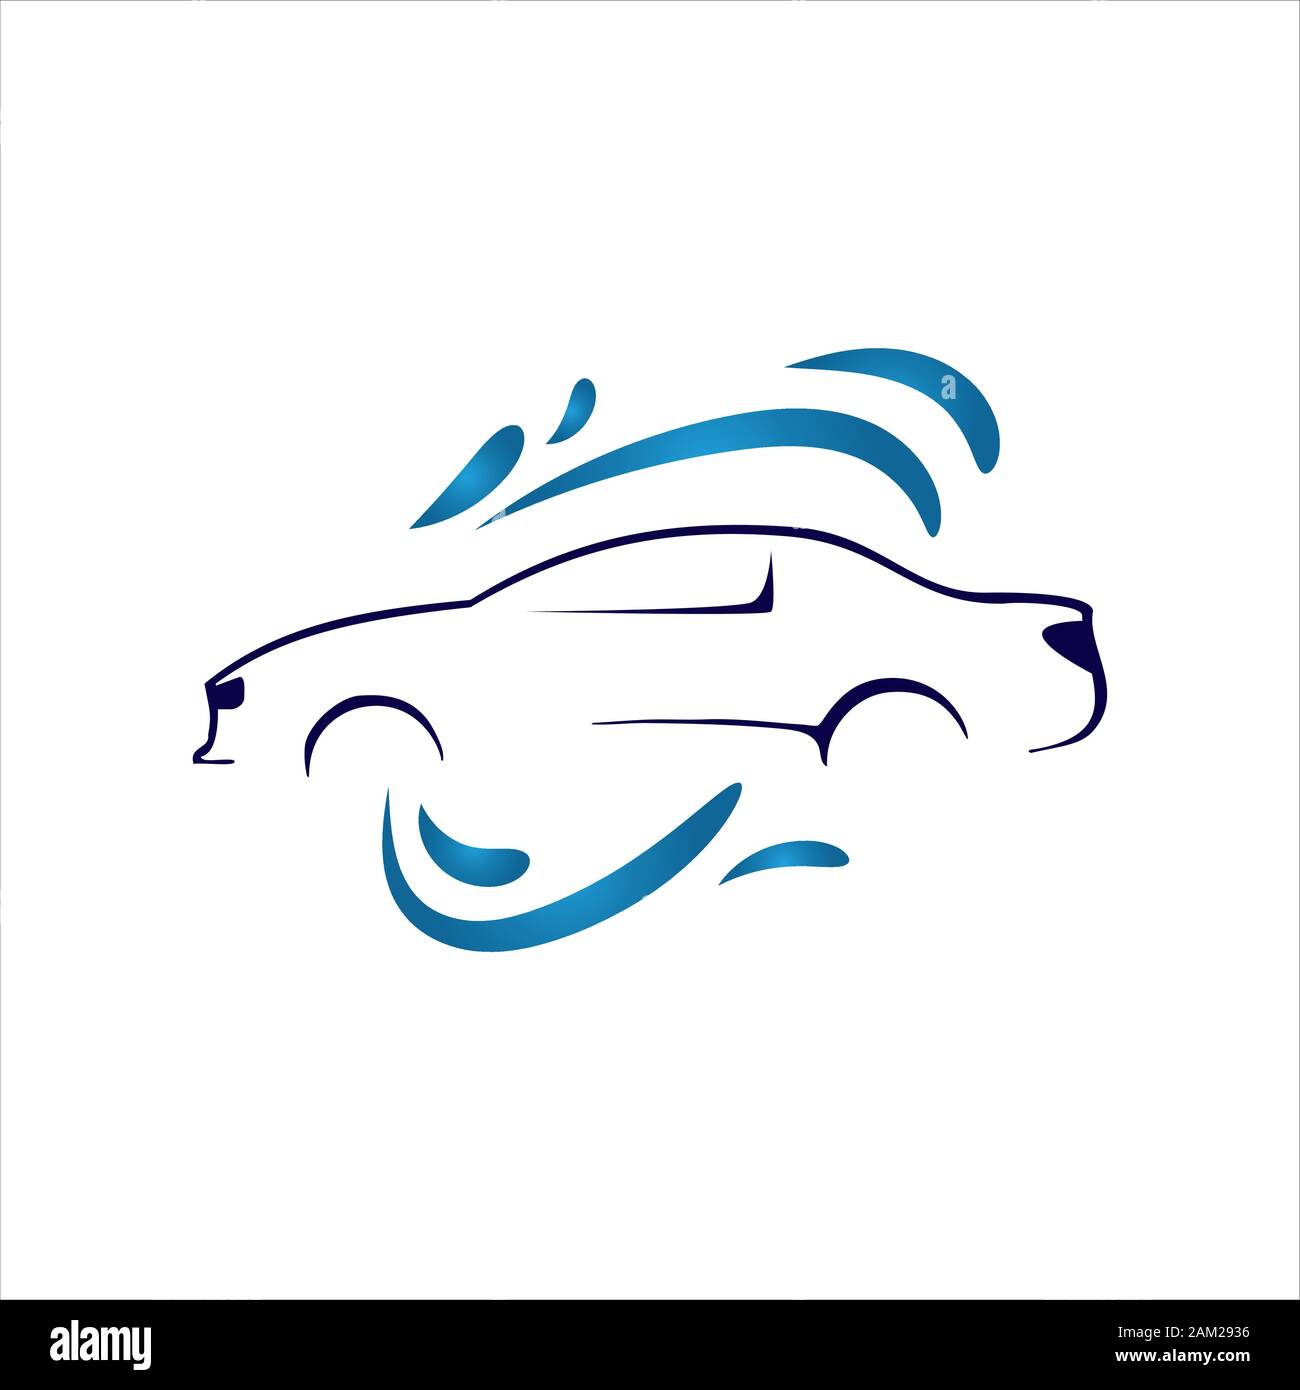 Carwash eco carwashing logo isolated vector emblem for car cleaning services Stock Vector